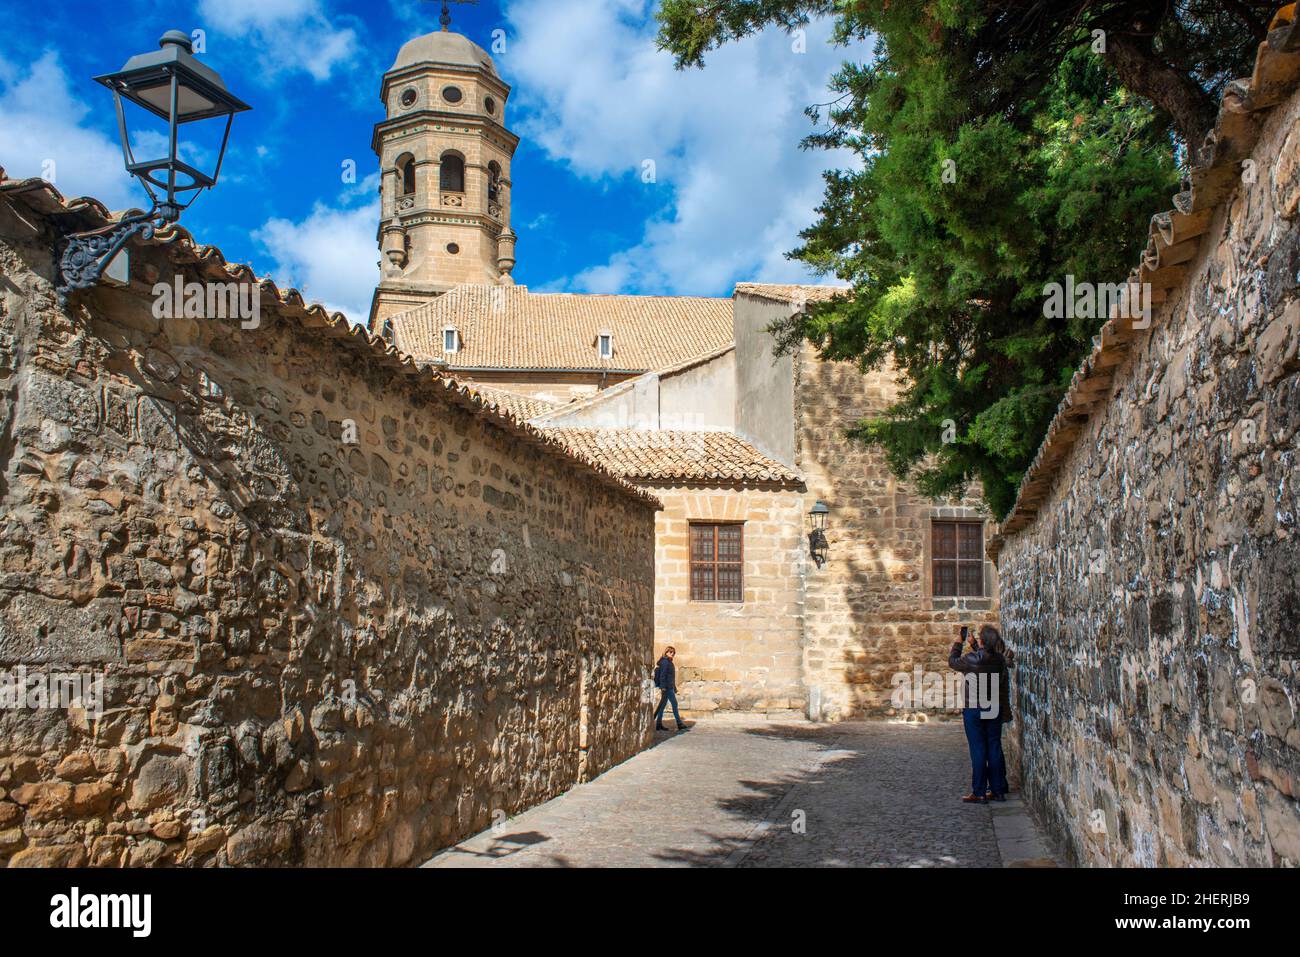 Old University, Chapel of San Juan Evangelista and street of the historic center, Baeza, UNESCO World Heritage Site. Jaen province, Andalusia, Souther Stock Photo